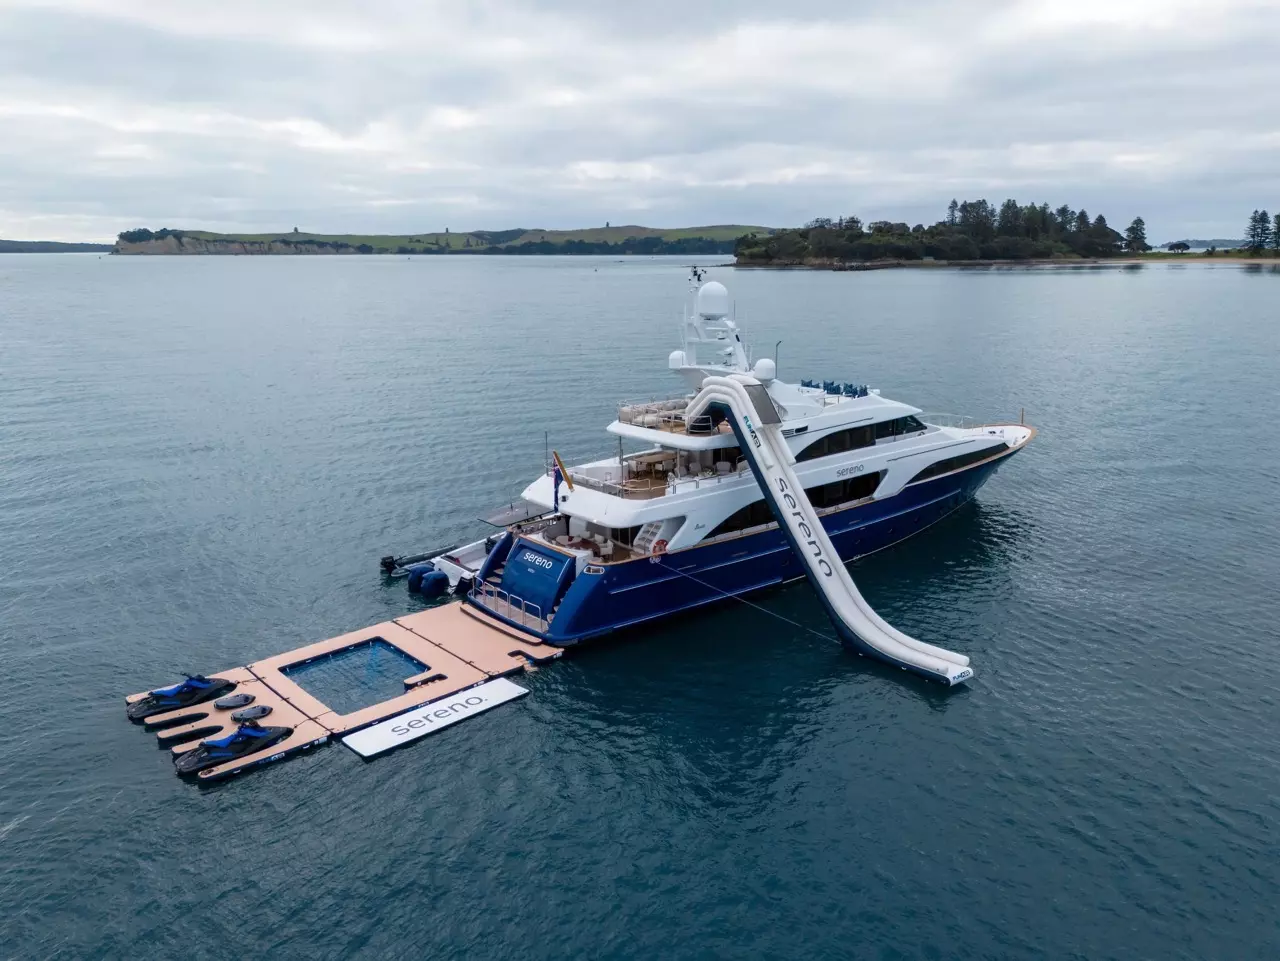 Sereno by Benetti - Special Offer for a private Superyacht Charter in Suva with a crew